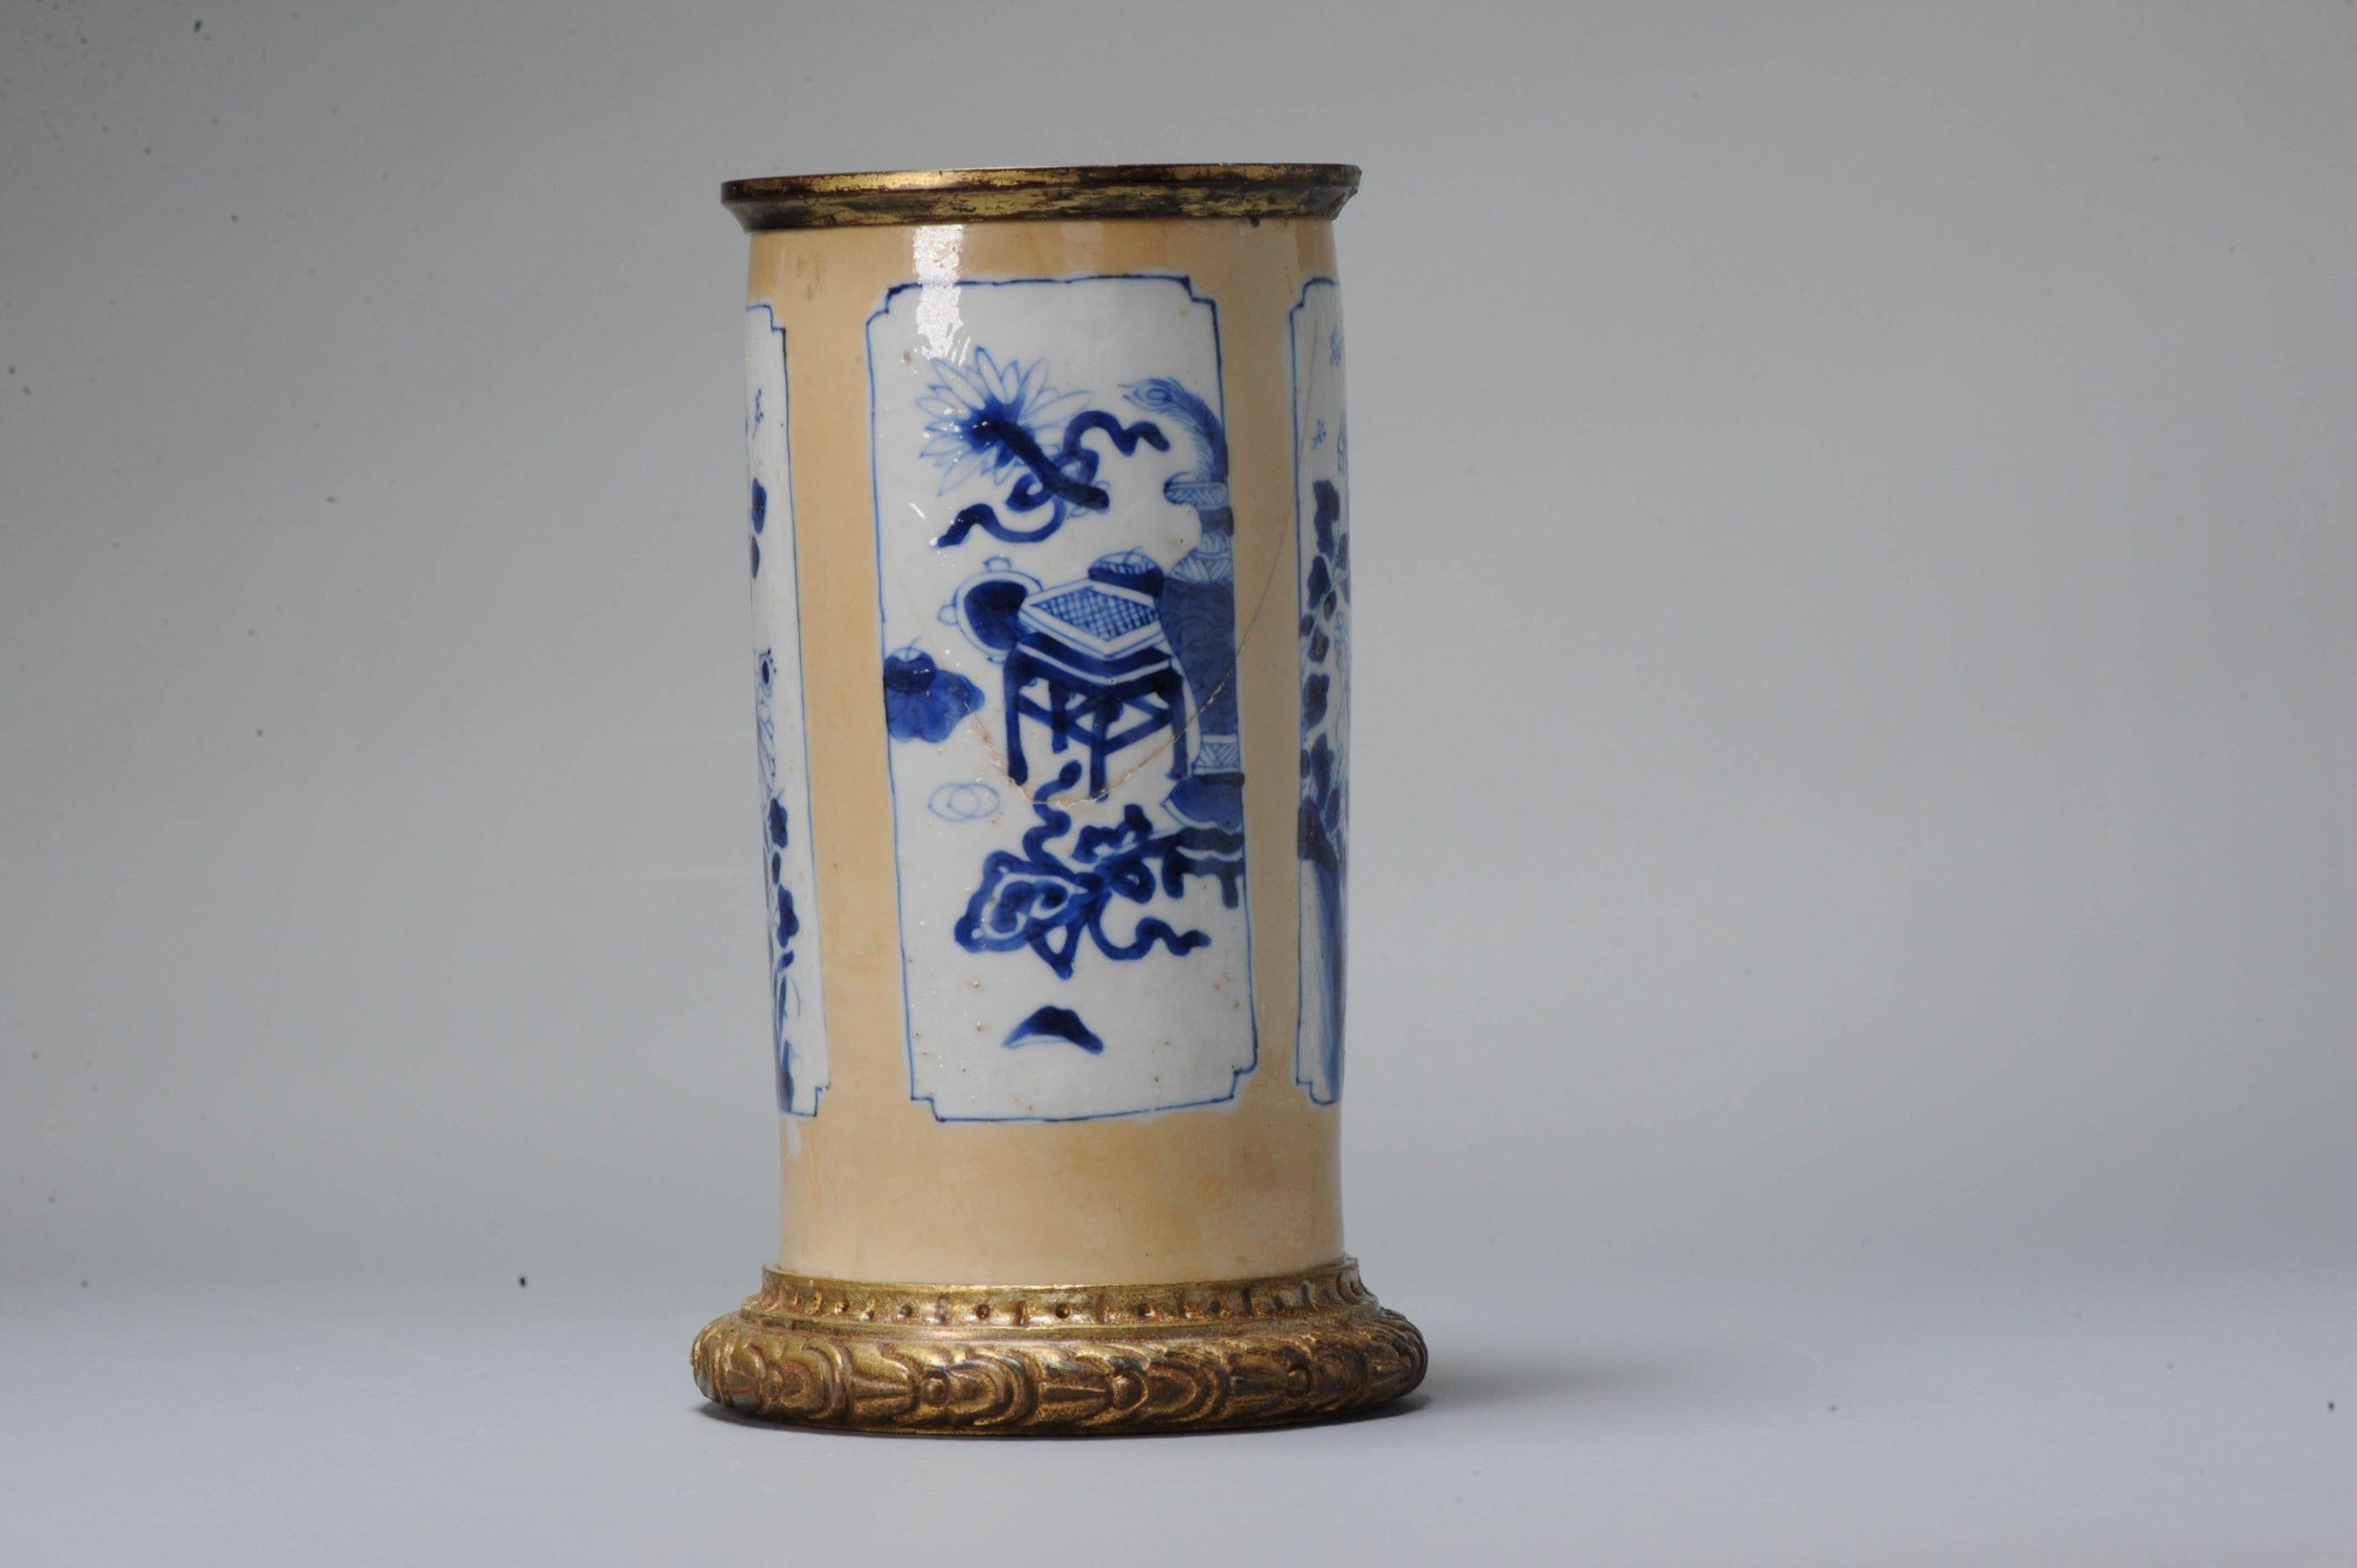 China, blue and white vase on a Cafe au lait ground with ormulu mounting. Very unusual piece. Lovely example of the Kangxi period.

The original piece was probably a sleeve vase which was cut off.

Additional information:
Material: Porcelain &